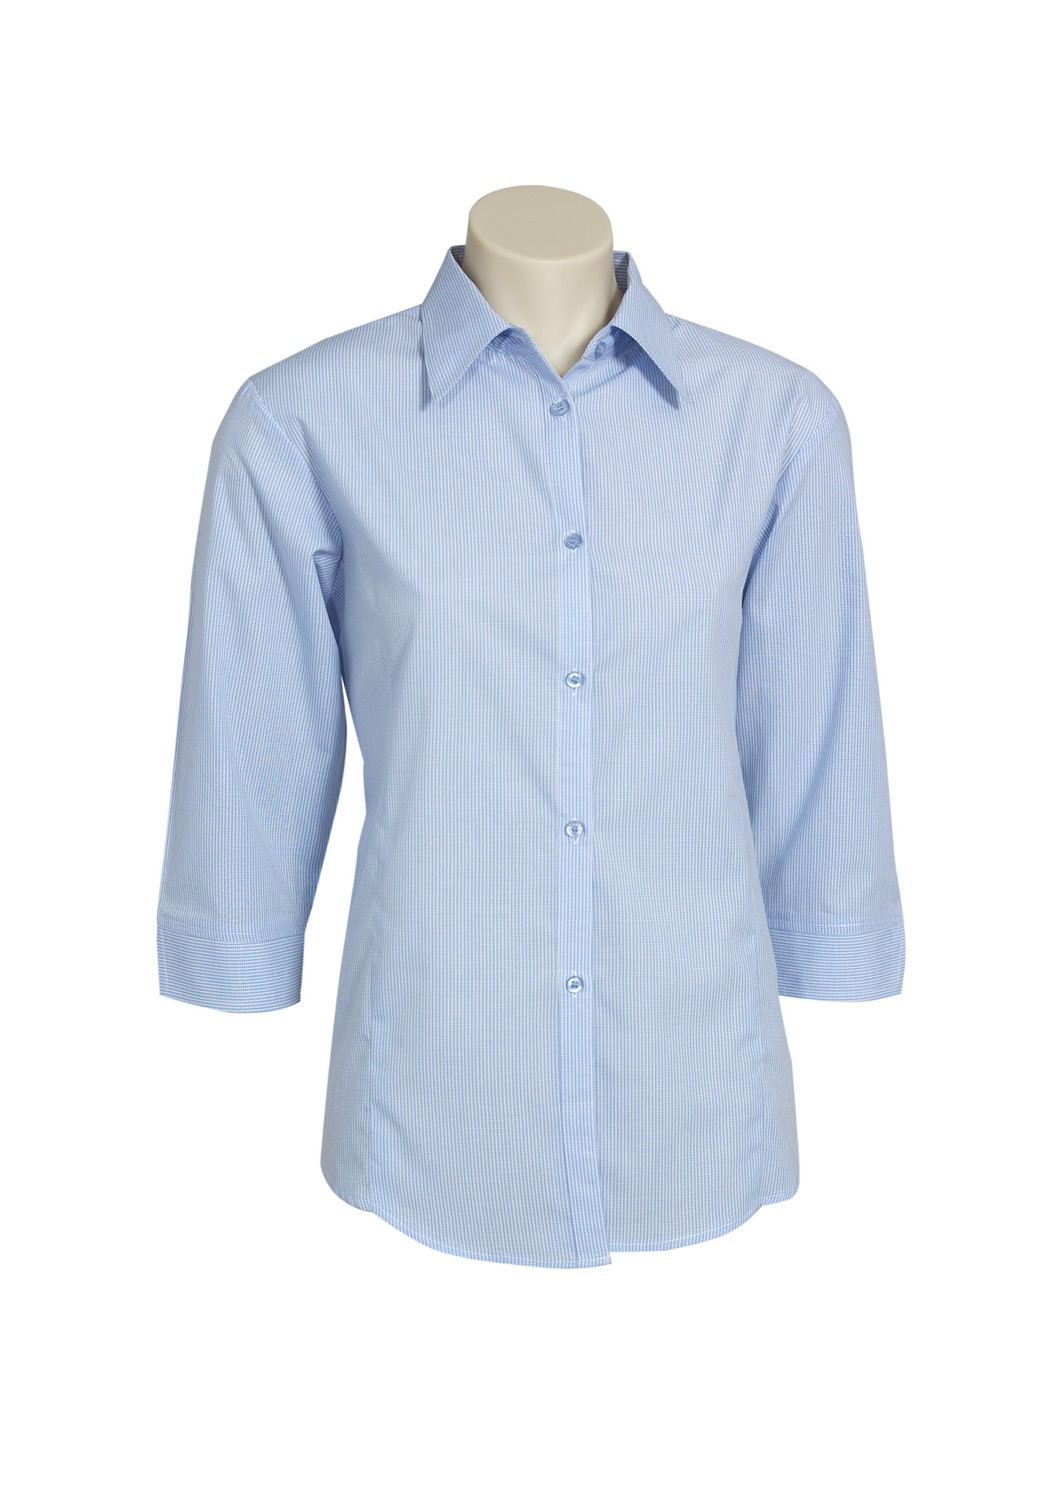 Buy Ladies 3/4 Sleeve Micro Check Shirt in NZ | The Uniform Centre